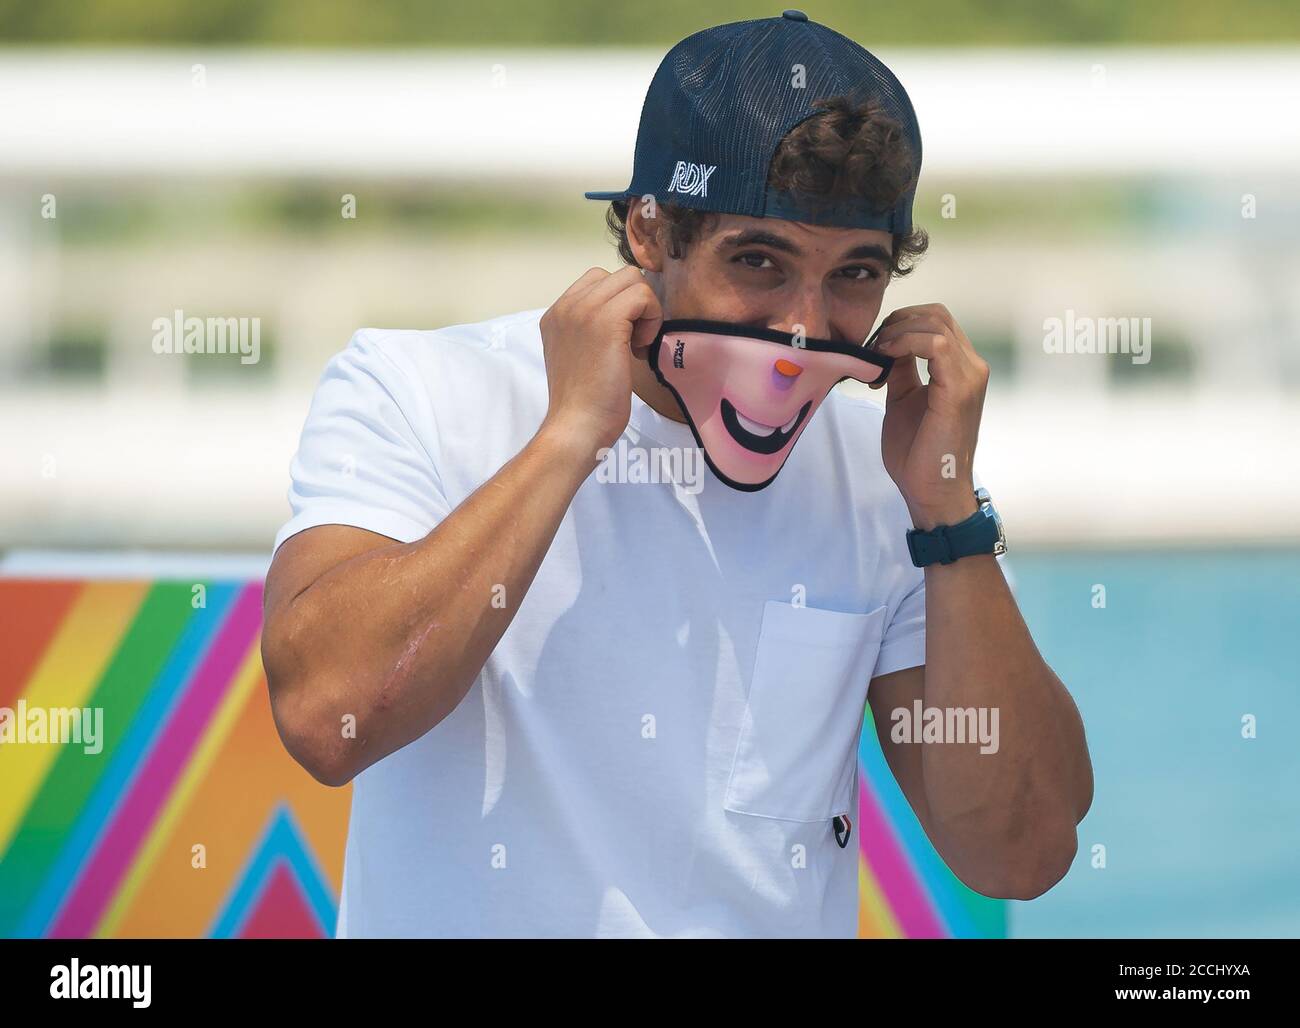 Malaga, Spain. 22nd Aug, 2020. Spanish actor Miguel Herran is seen wearing  a face mask as he attends the film "Hasta el cielo" photocall at Muelle Uno.The  23rd edition of the Spanish